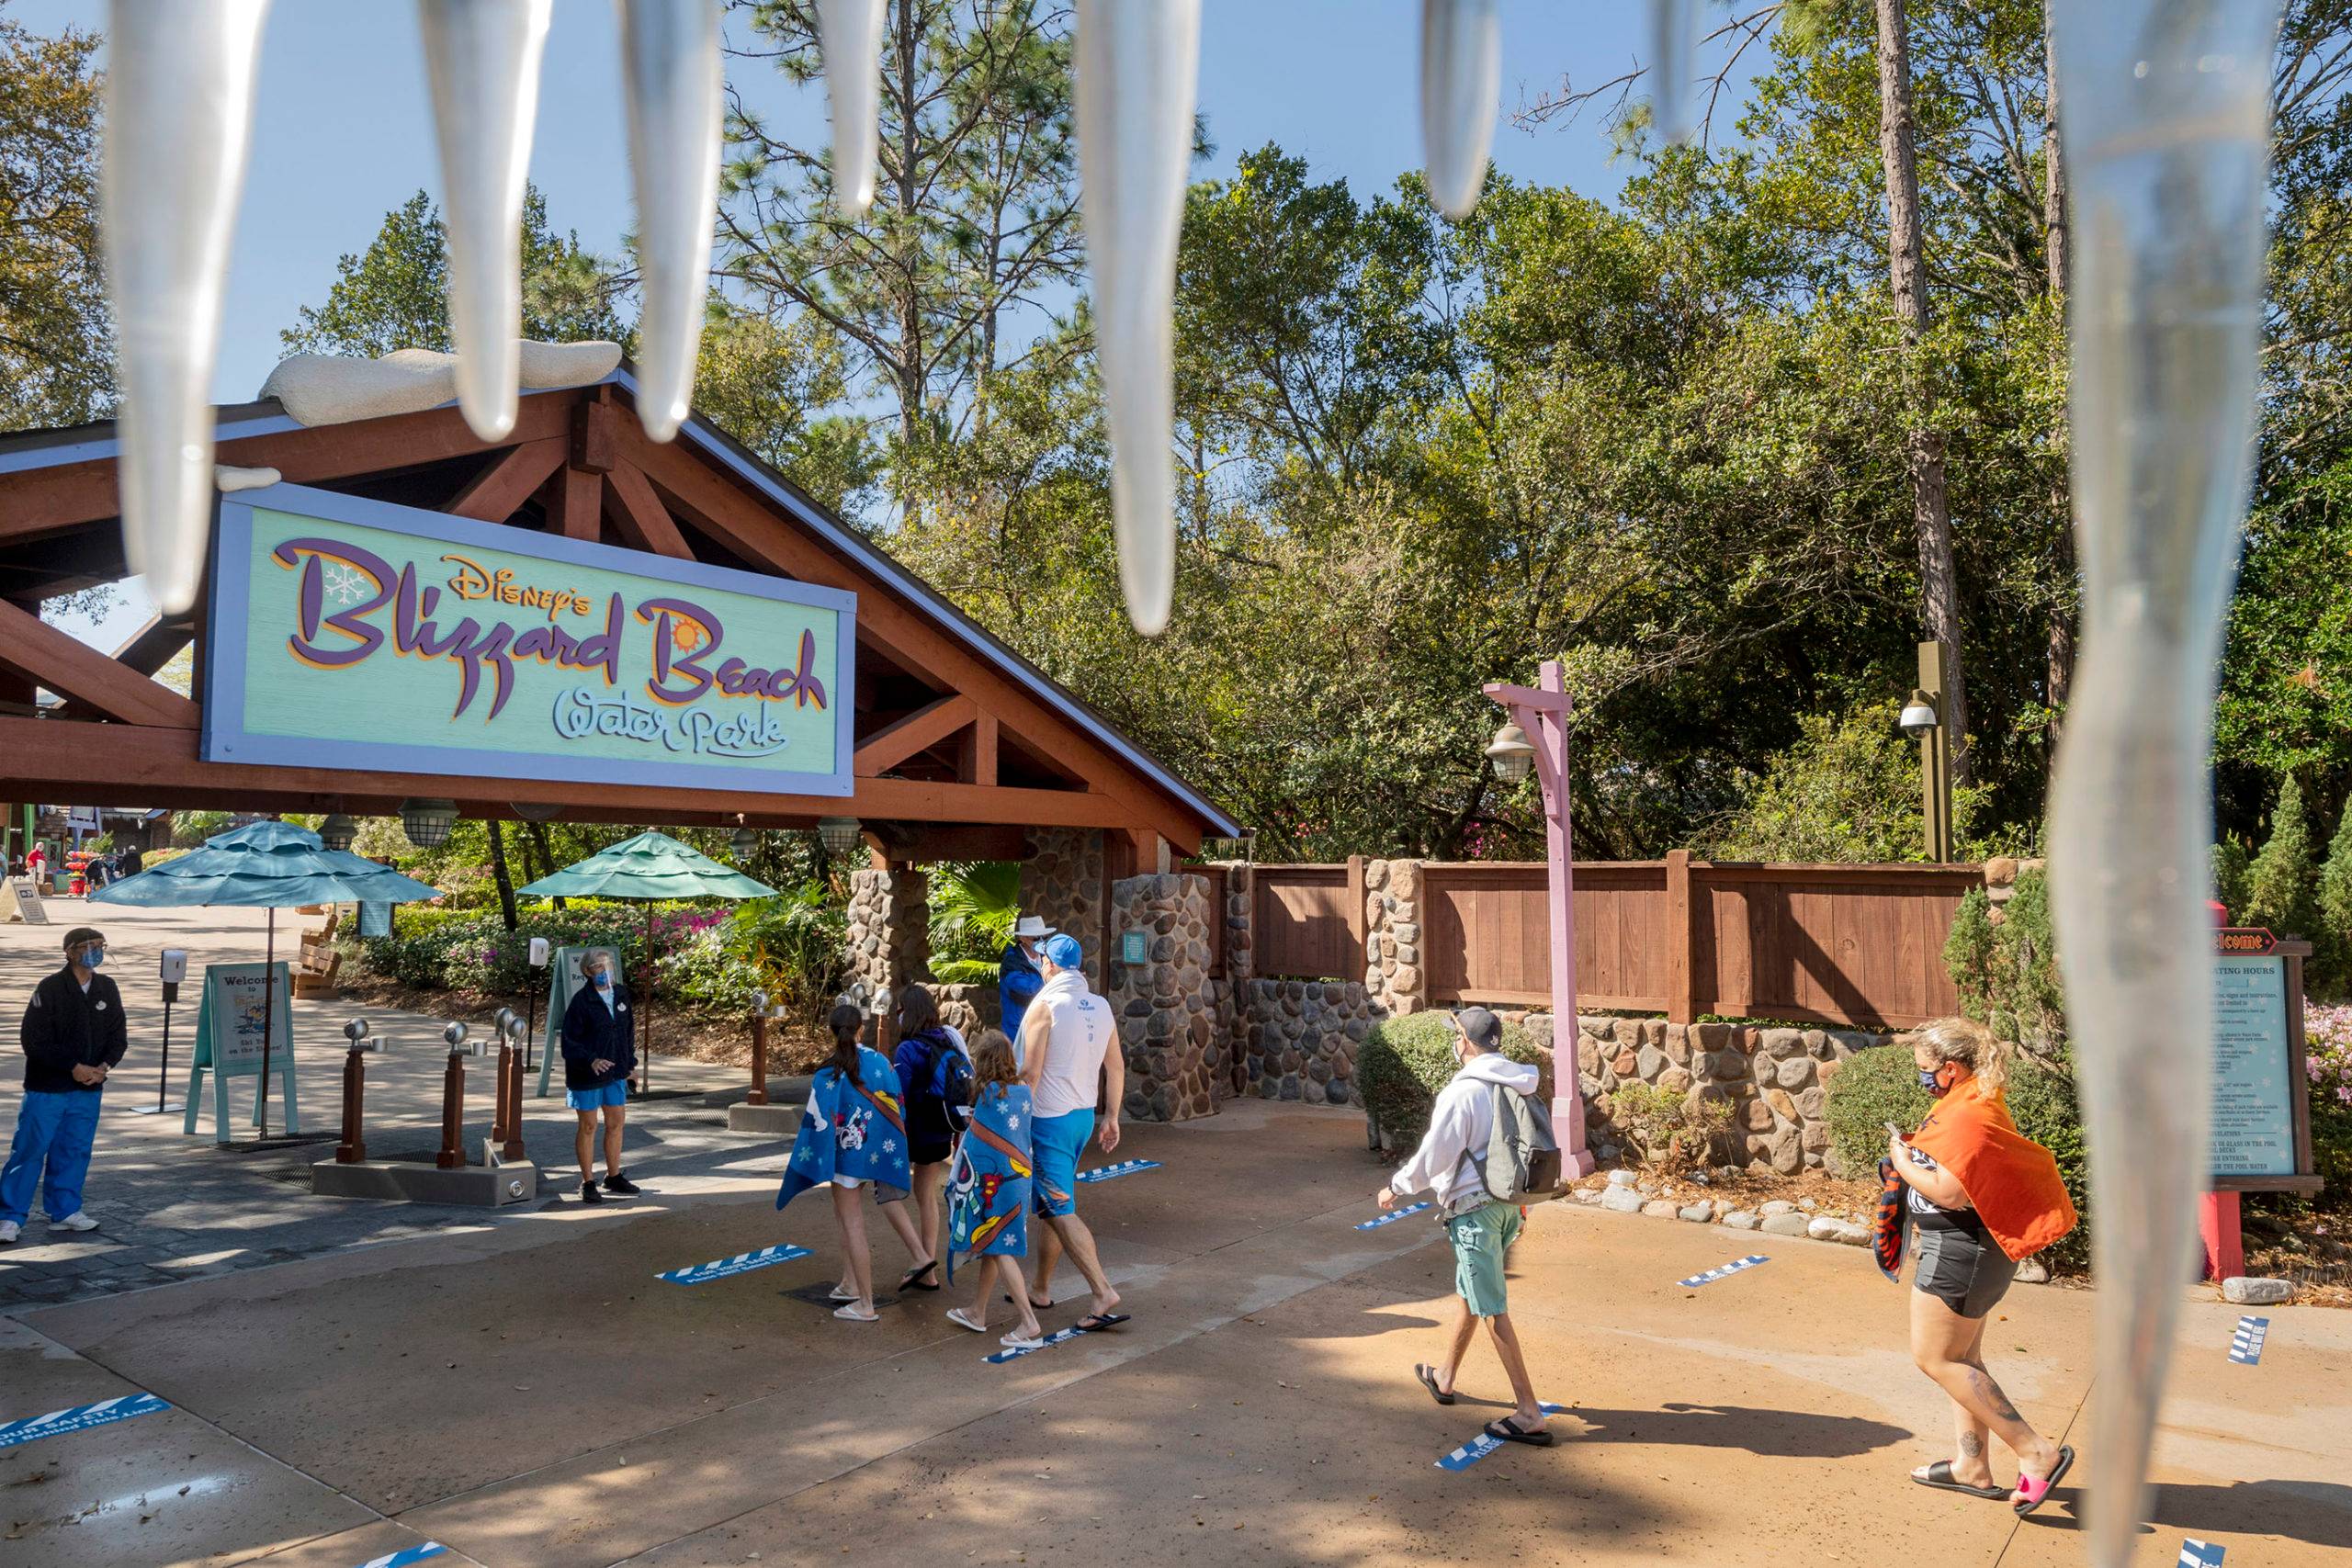 Blizzard Beach is currently closed for its annual refurbishment